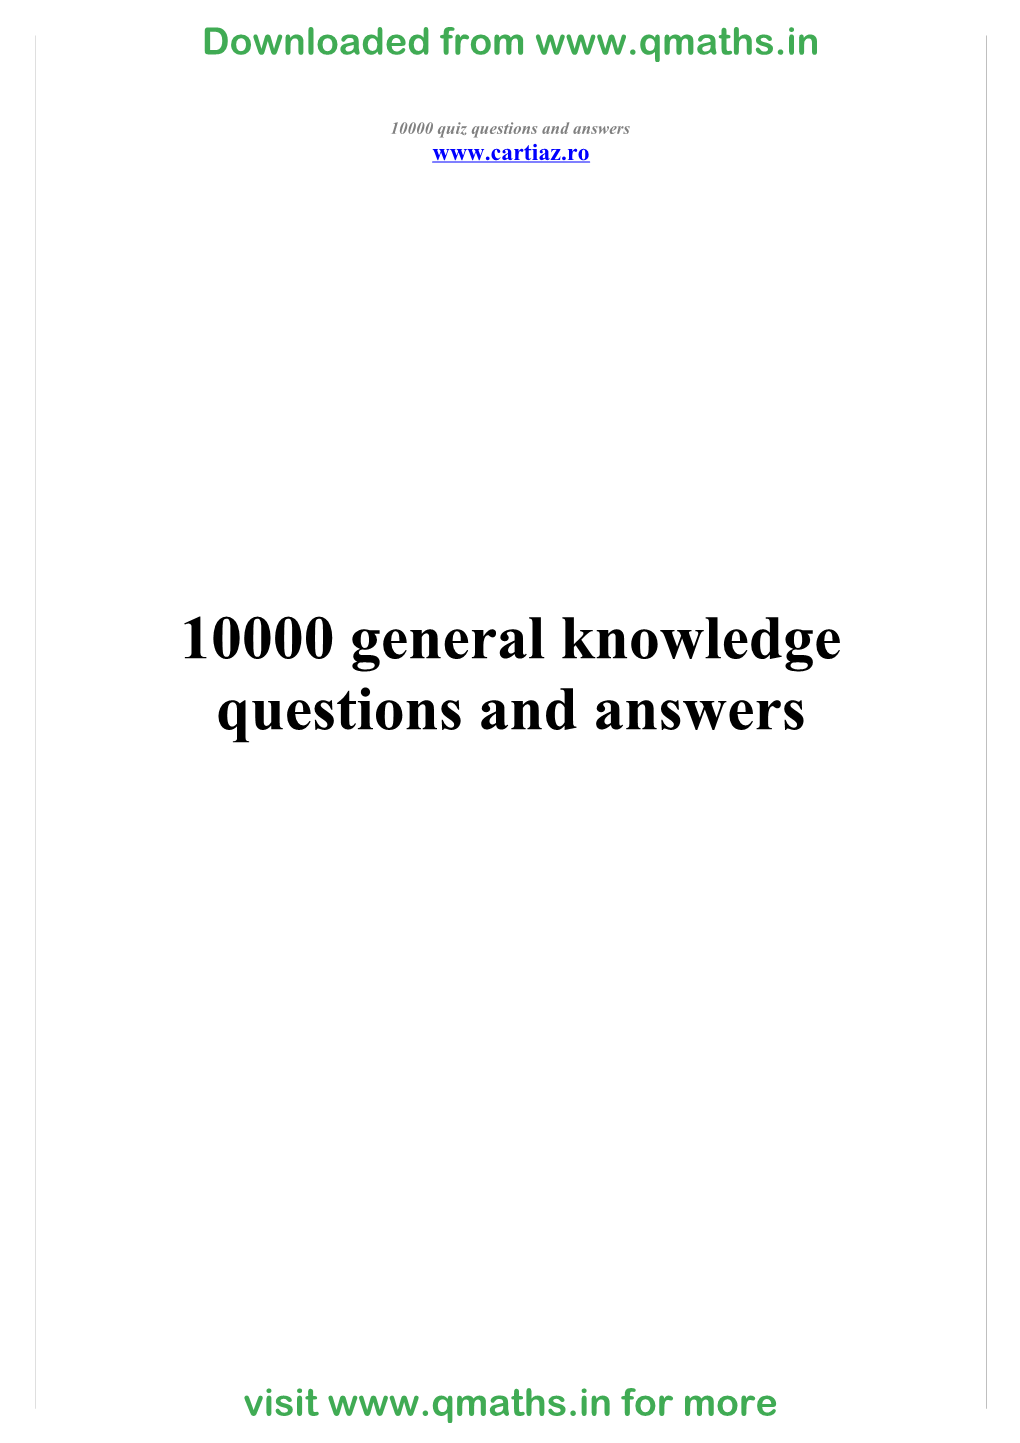 10000 General Knowledge Questions and Answers